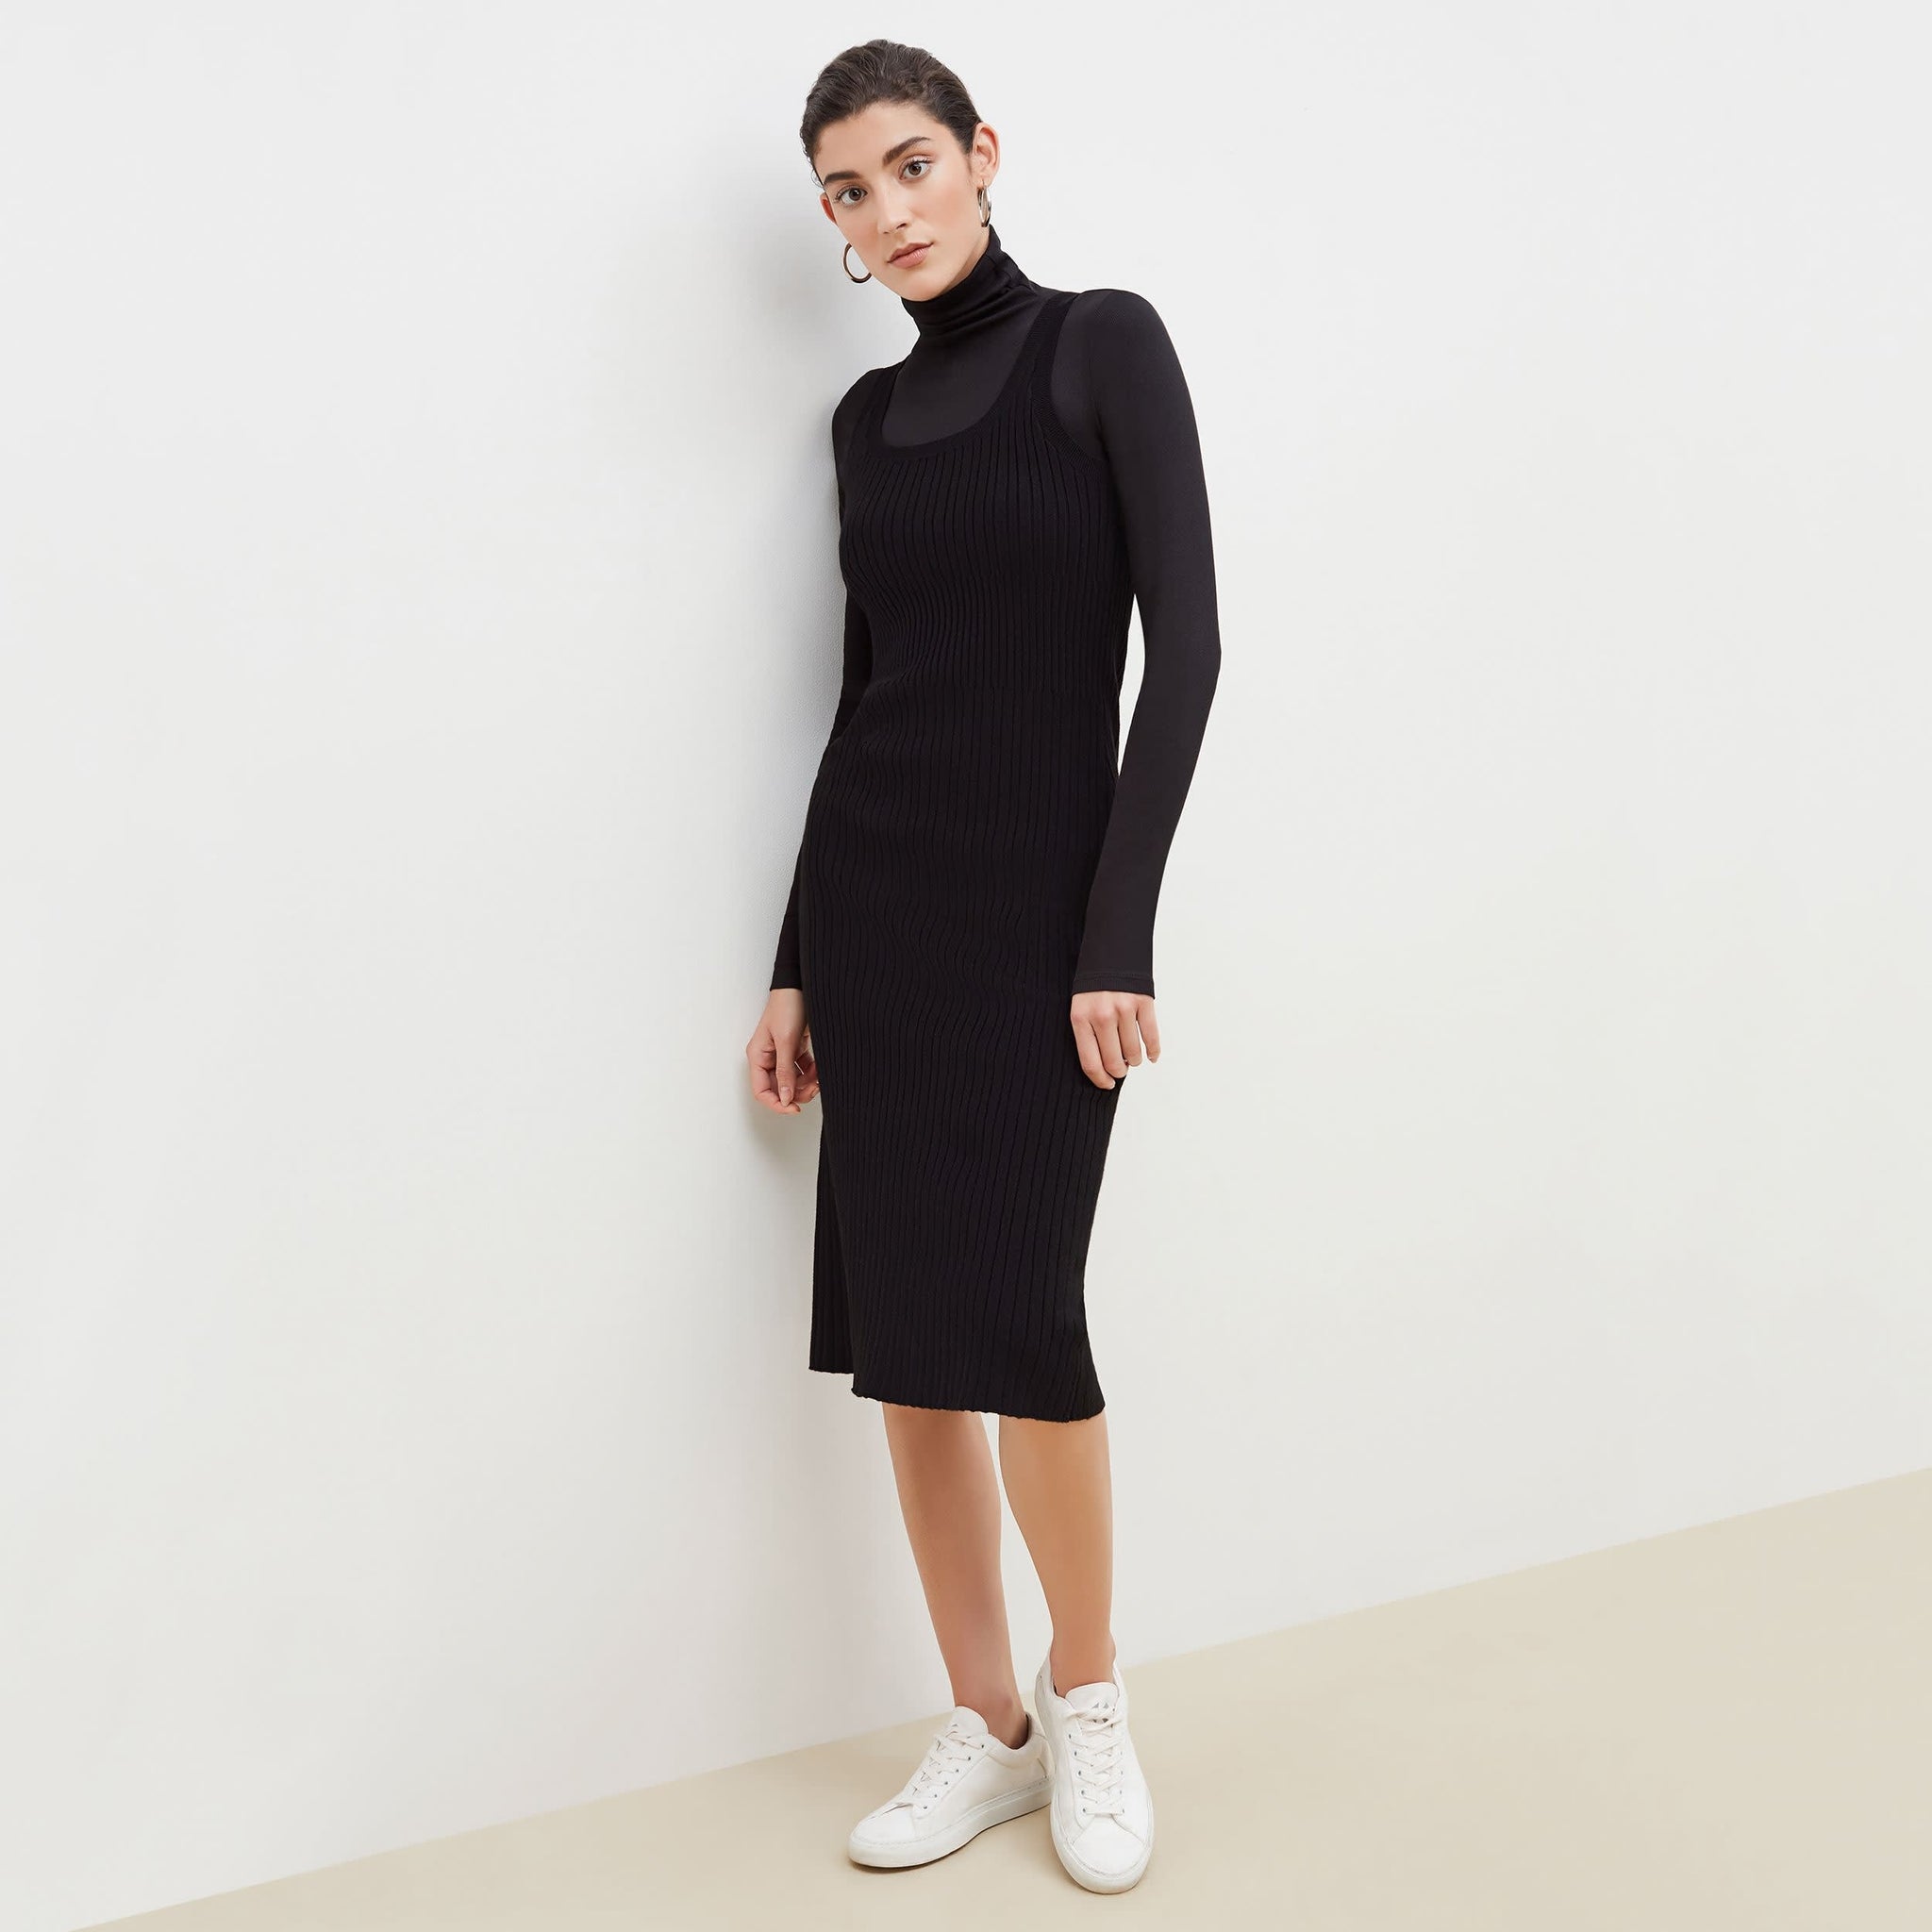 Front image of a woman standing wearing the Gwen Dress in Black